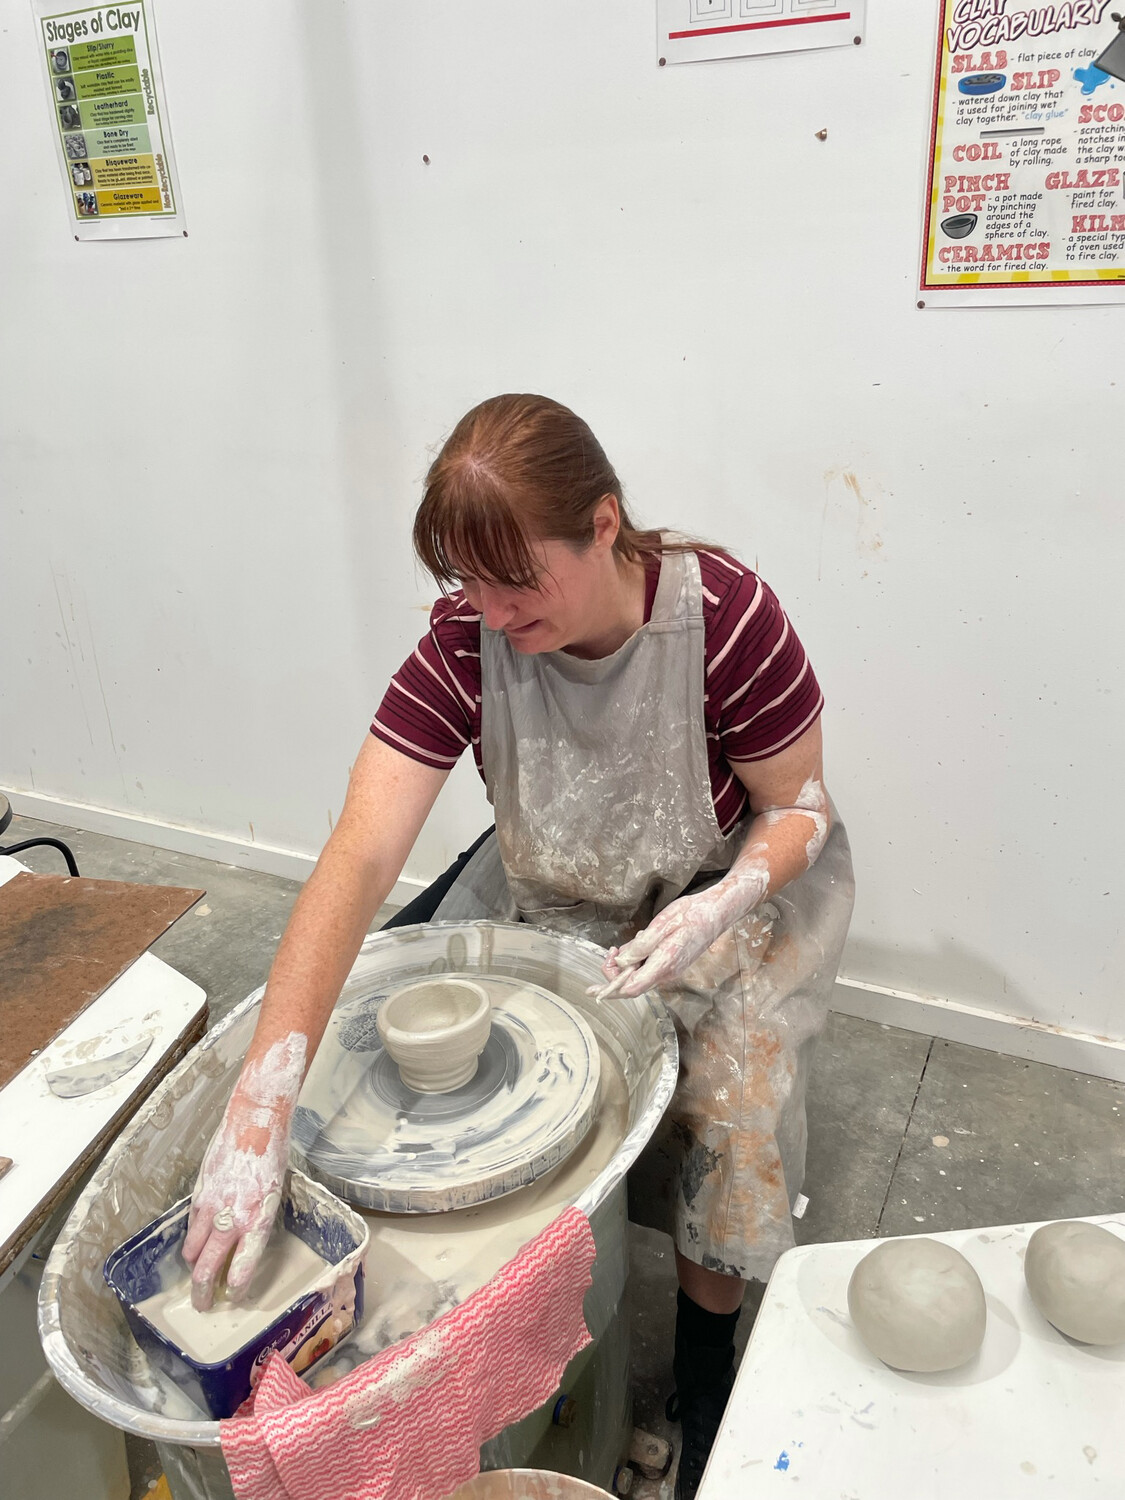 Slip, Spin & Sculpt! 4 week Pottery course Friday 5th August 12:30-2:30pm